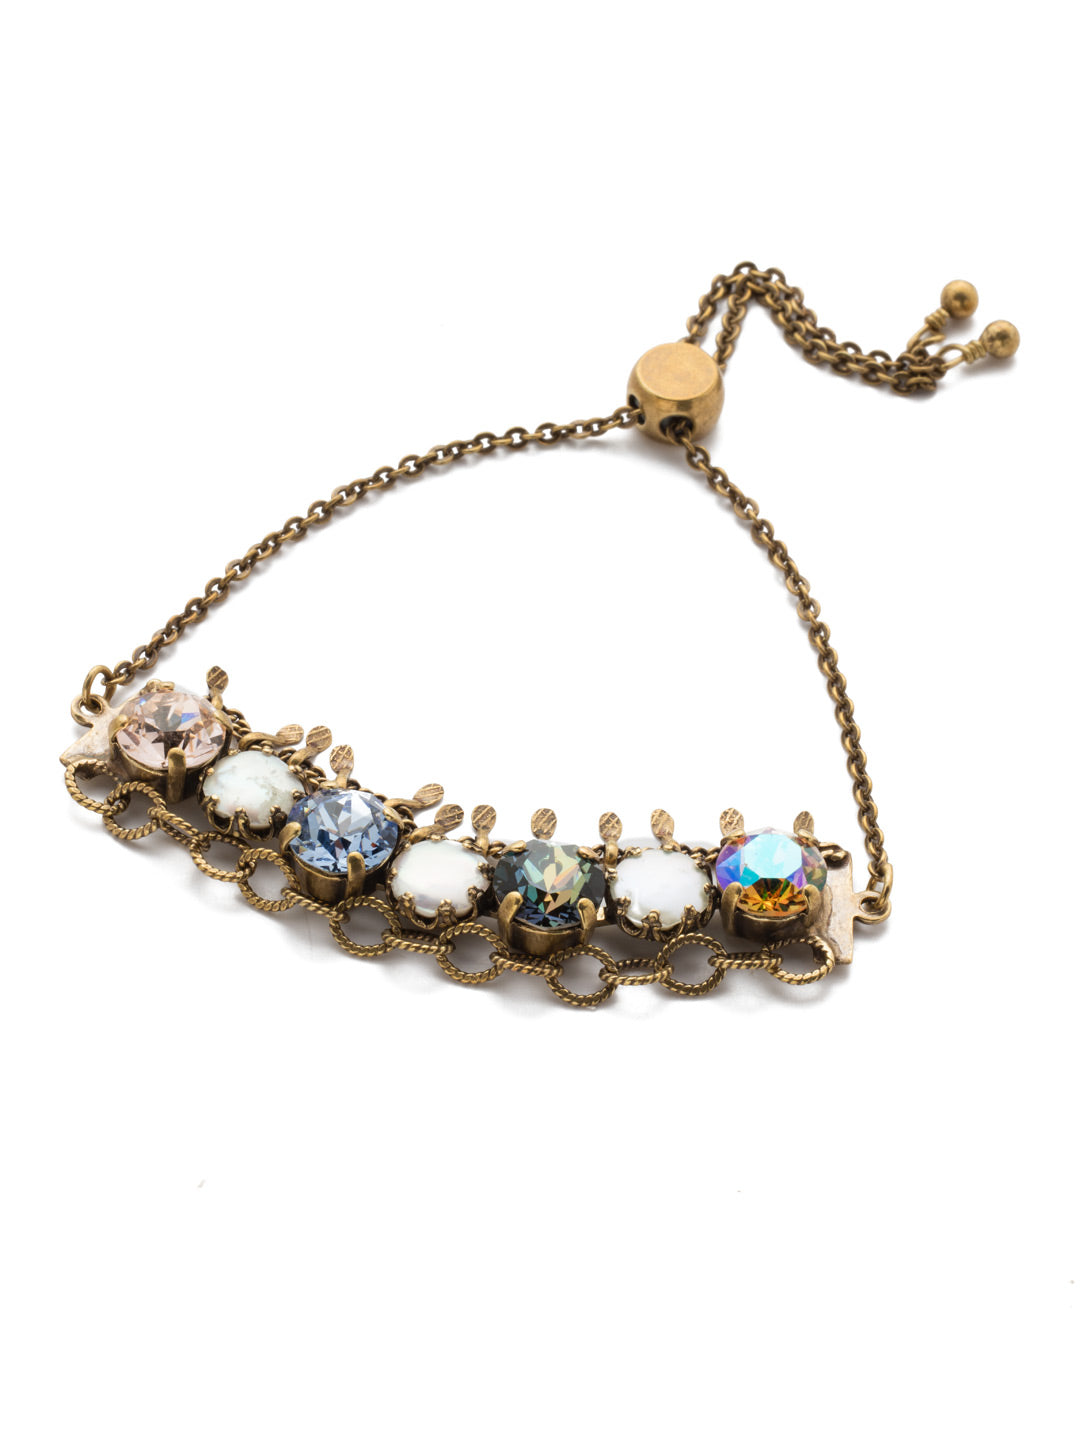 Oaklyn Slider Bracelet - BEP1AGSDE - <p>Fun metal detail, crystal sparklers, opaque stones, the Oaklyn Slider Bracelete offers it all. From Sorrelli's Selvedge Denim collection in our Antique Gold-tone finish.</p>